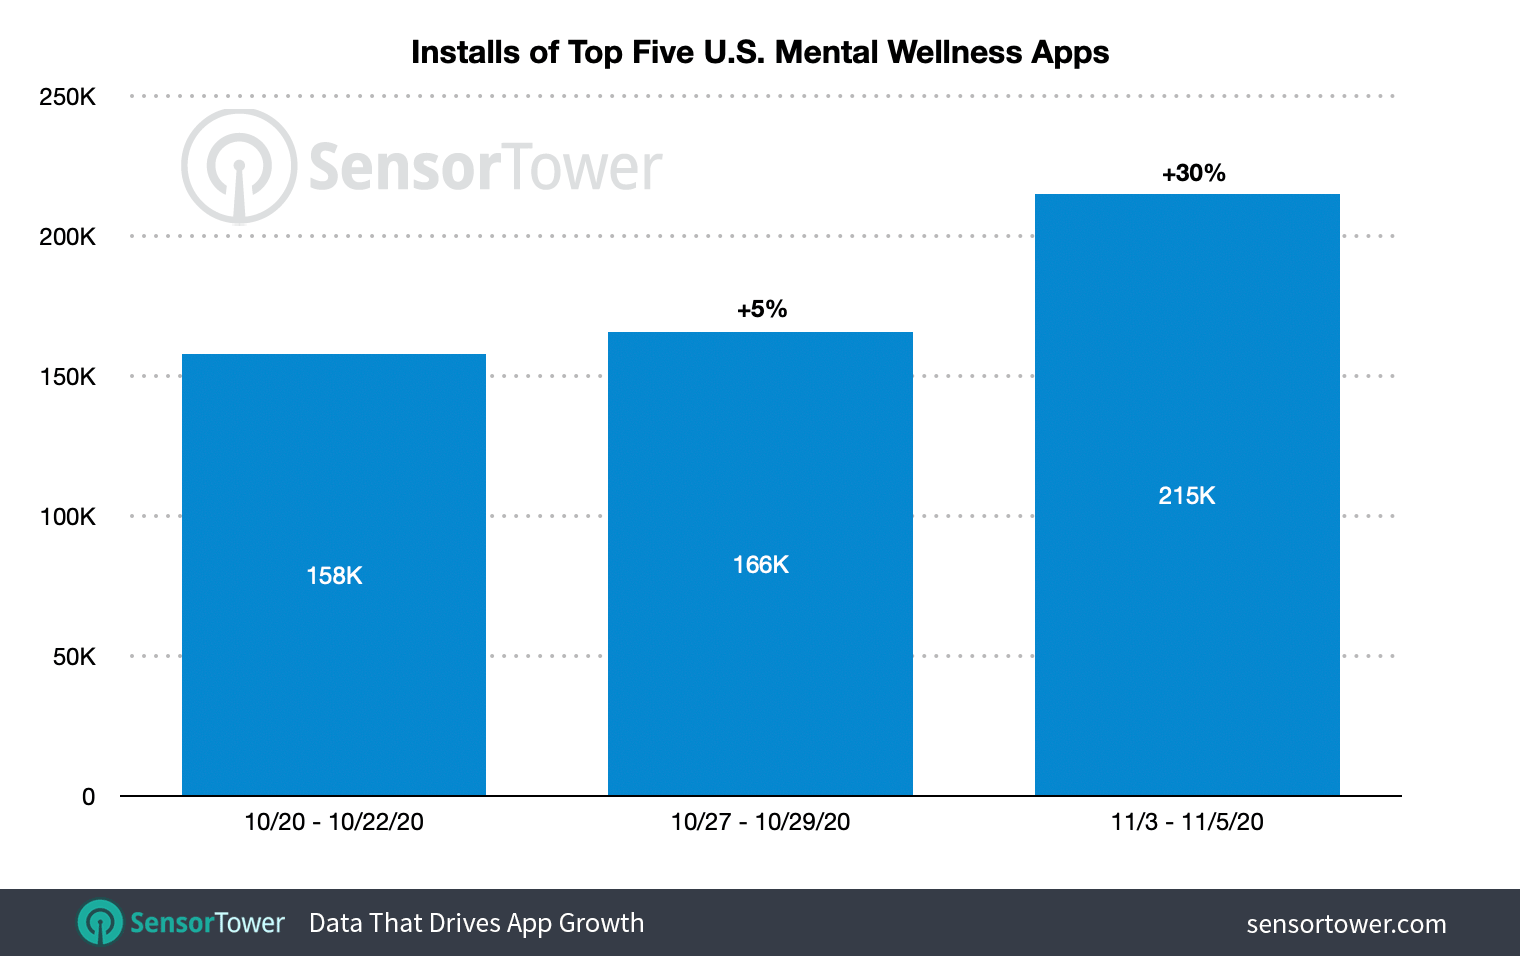 The five top-grossing mental wellness apps saw their installs grow 30 percent week-over-week when compared to October 27 to October 29